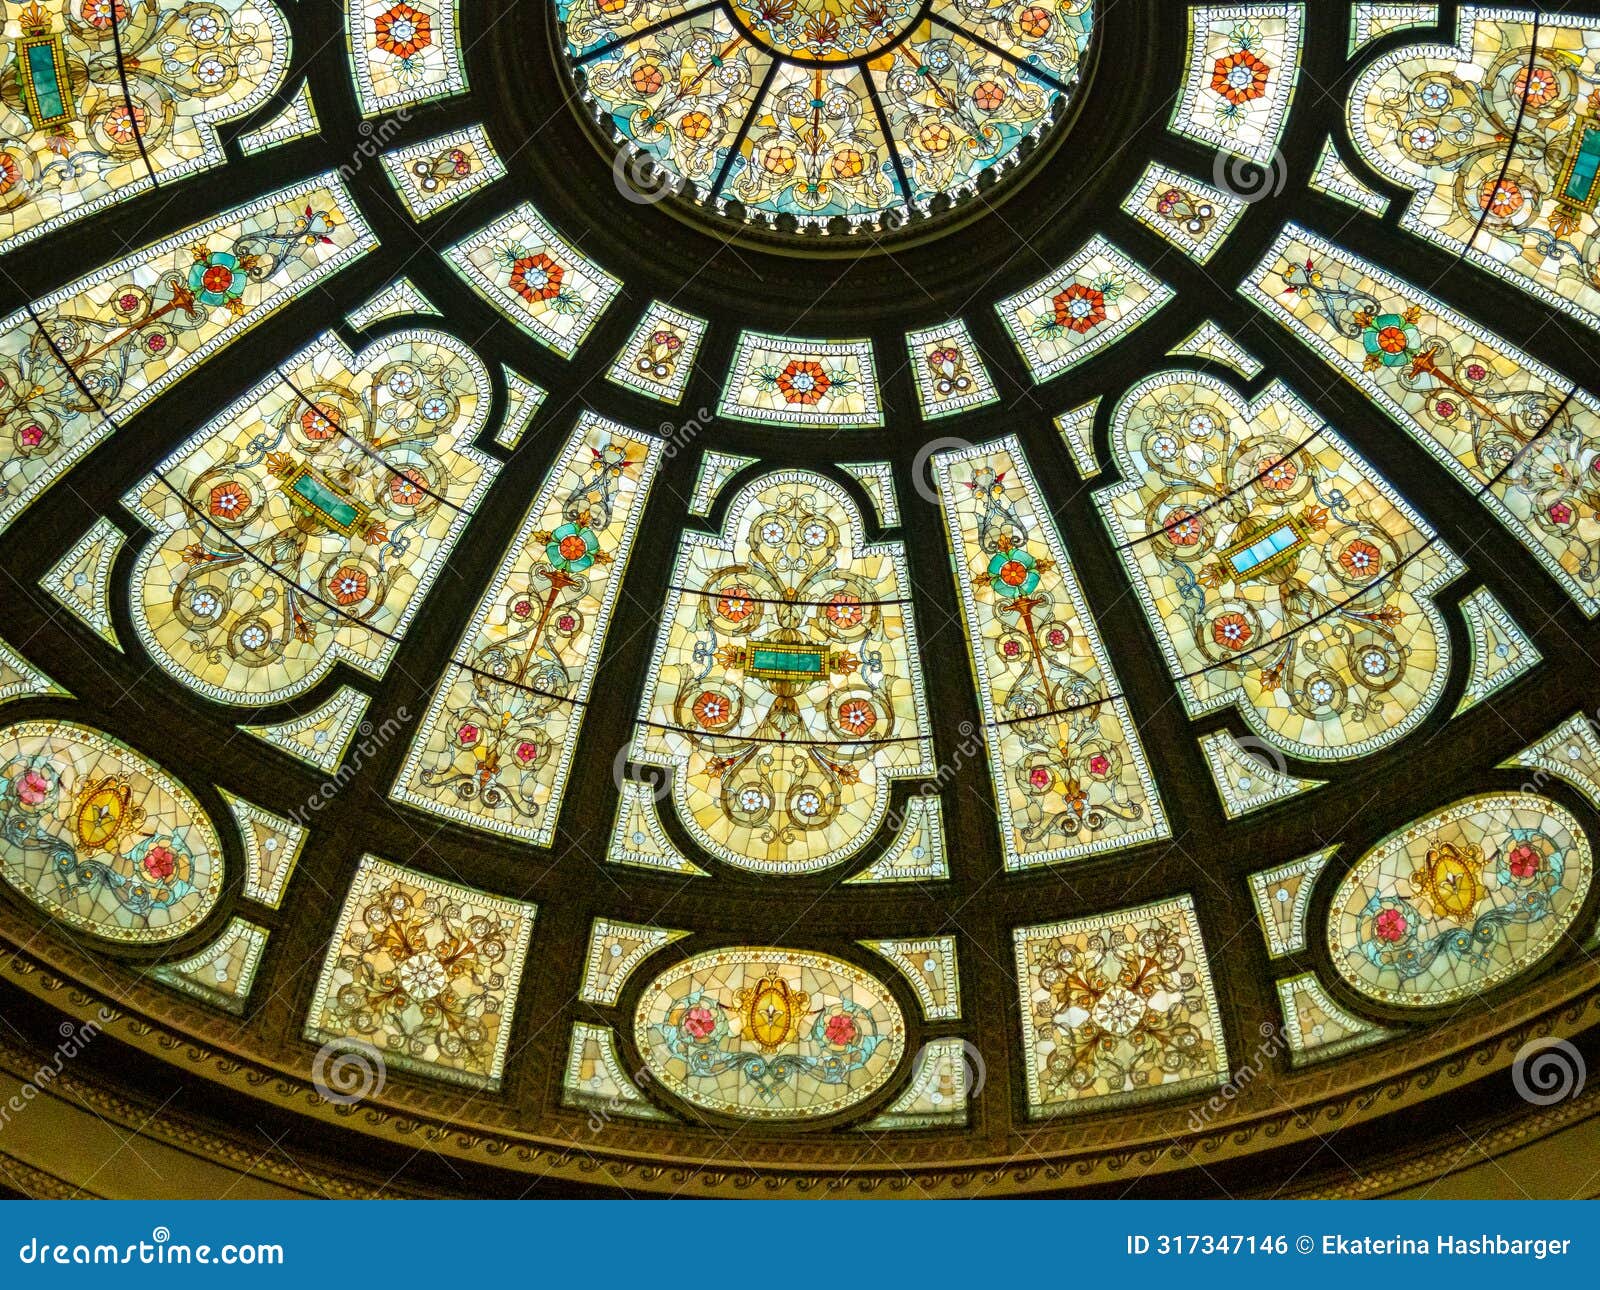 tiffany glass dome of chicago cultural center in chicago, illinois